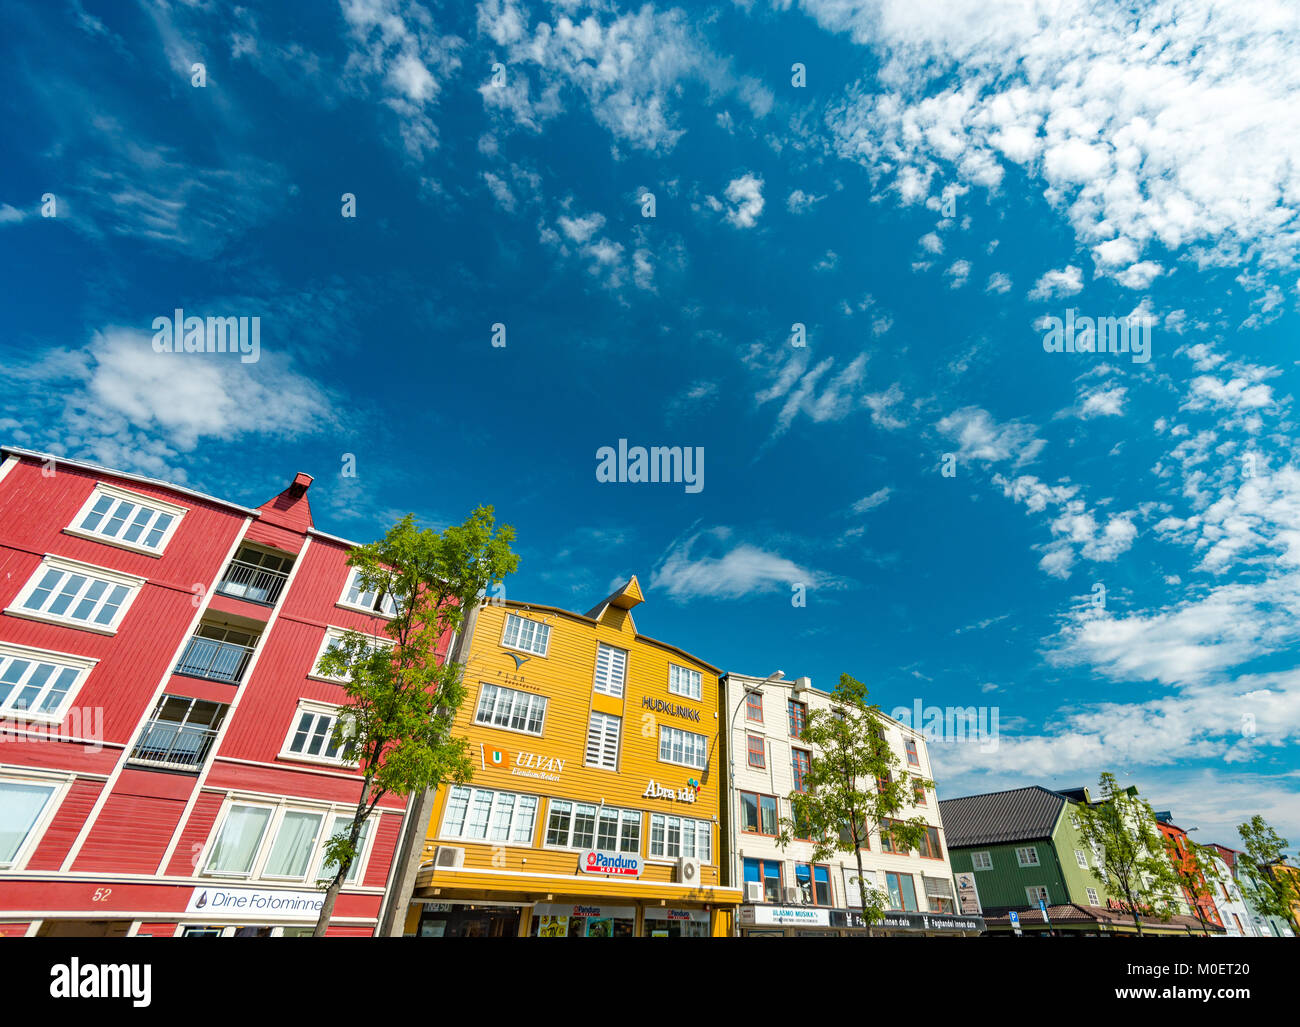 Trondheim, Norway - July 27, 2013. Trondheim, Norway.  View of central city part with historic architectural style. Popular tourist destination in Sca Stock Photo